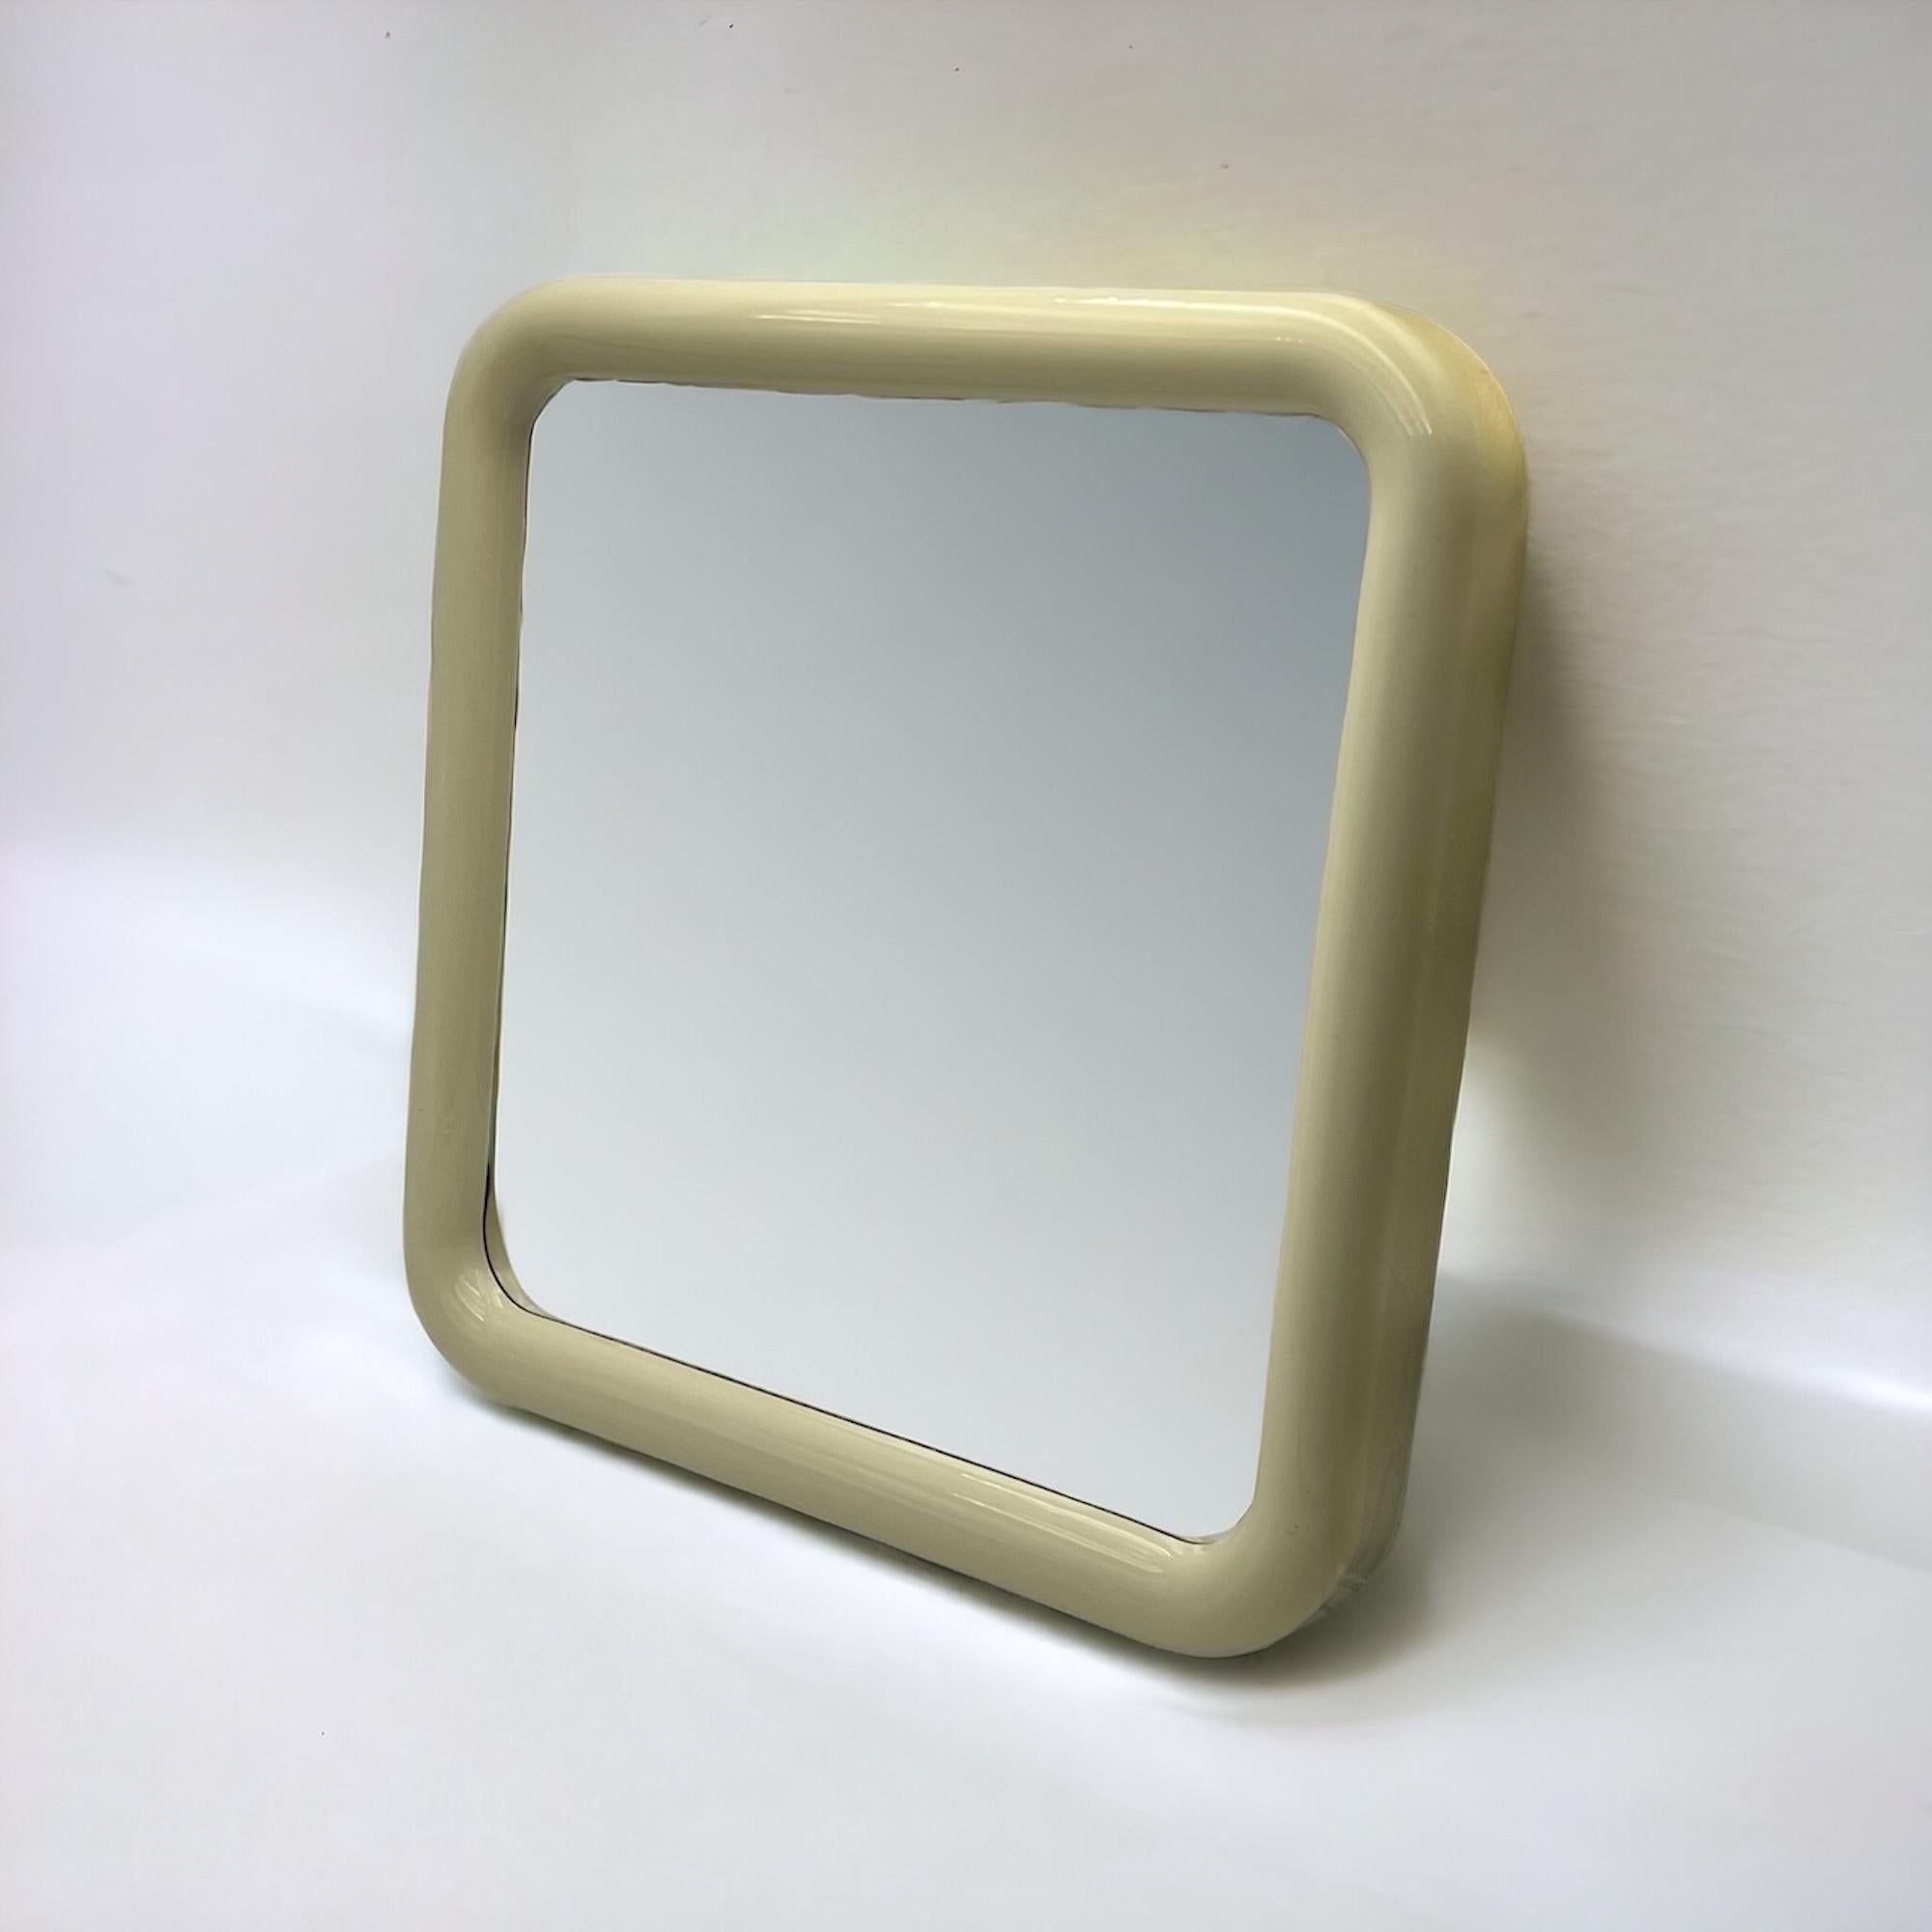 Plastic 1960s Italian Space Age Wall Mirror - Chic Design, Thick Borders, Beige Hue.